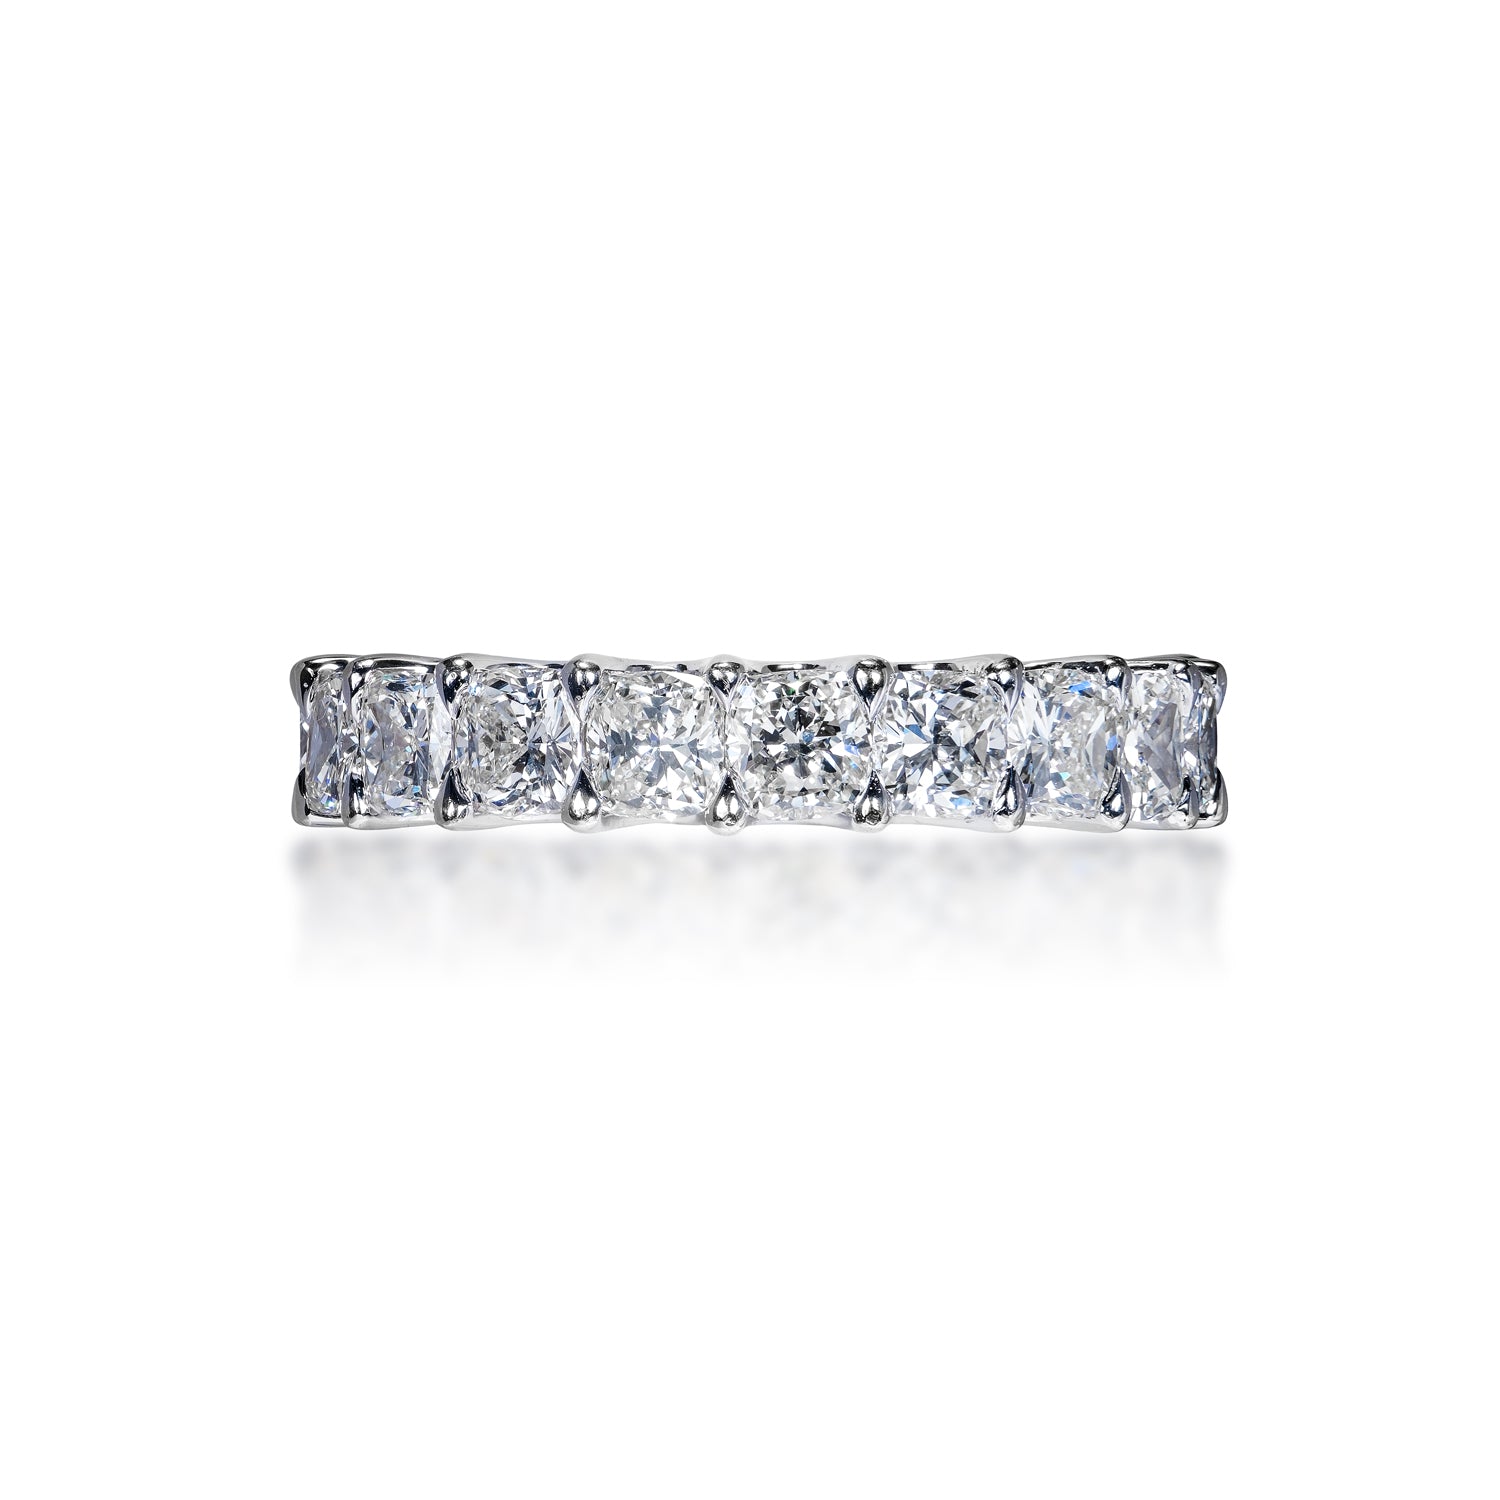 Ellis 4 Carats Cushion Cut Diamond Eternity Ring in 18k White Gold U-Shape Shared Prong Front View